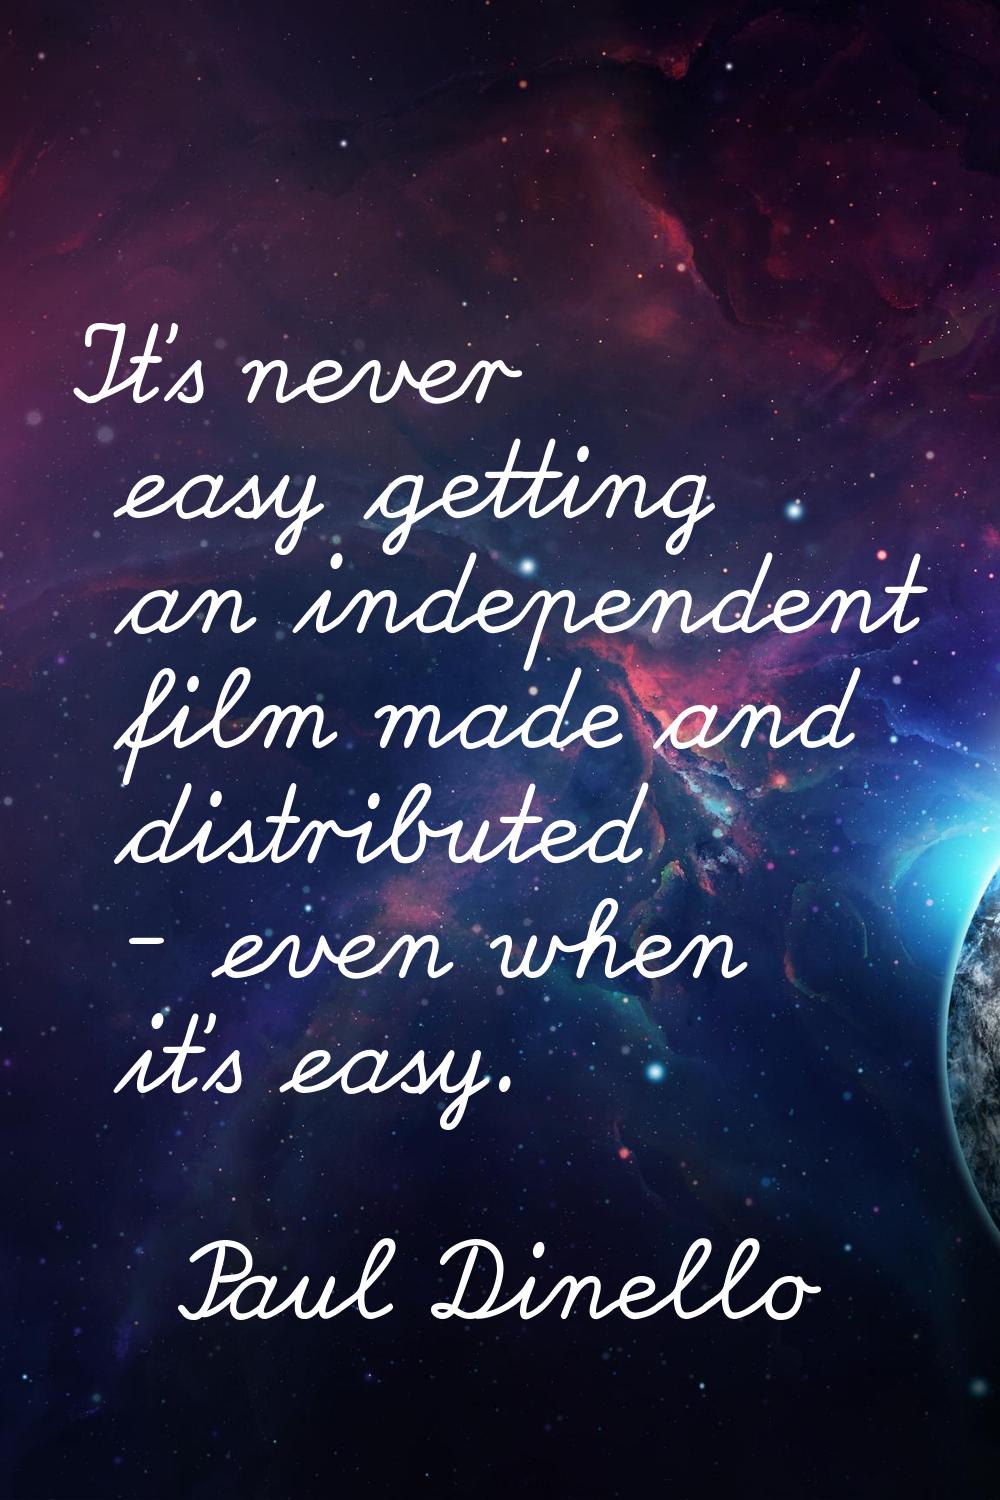 It's never easy getting an independent film made and distributed - even when it's easy.